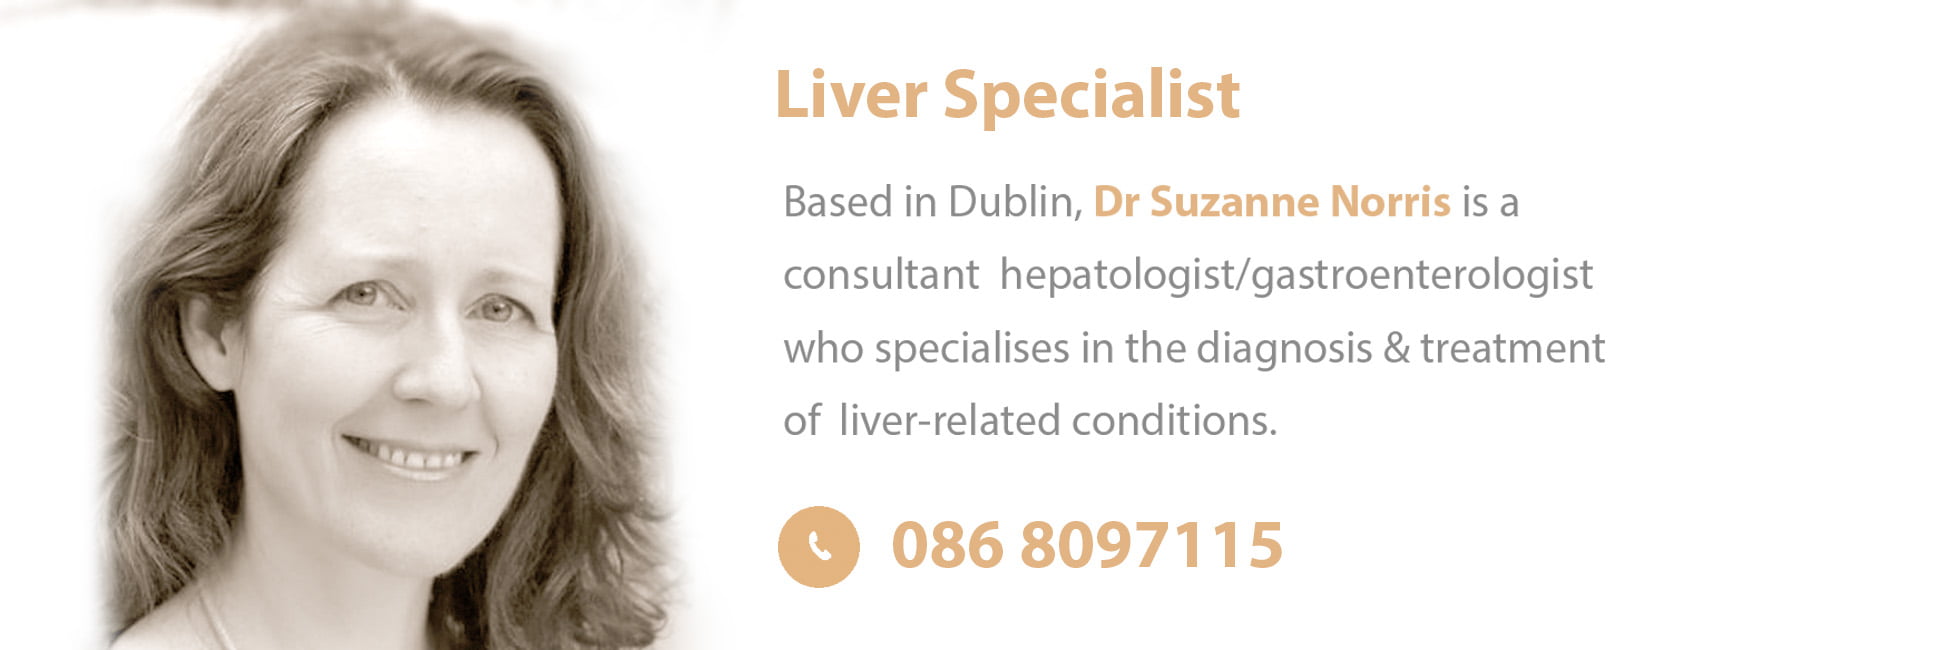 Dr Suzanne Norris, Liver Wellness & Liver Tests, Beacon Hospital, Dublin